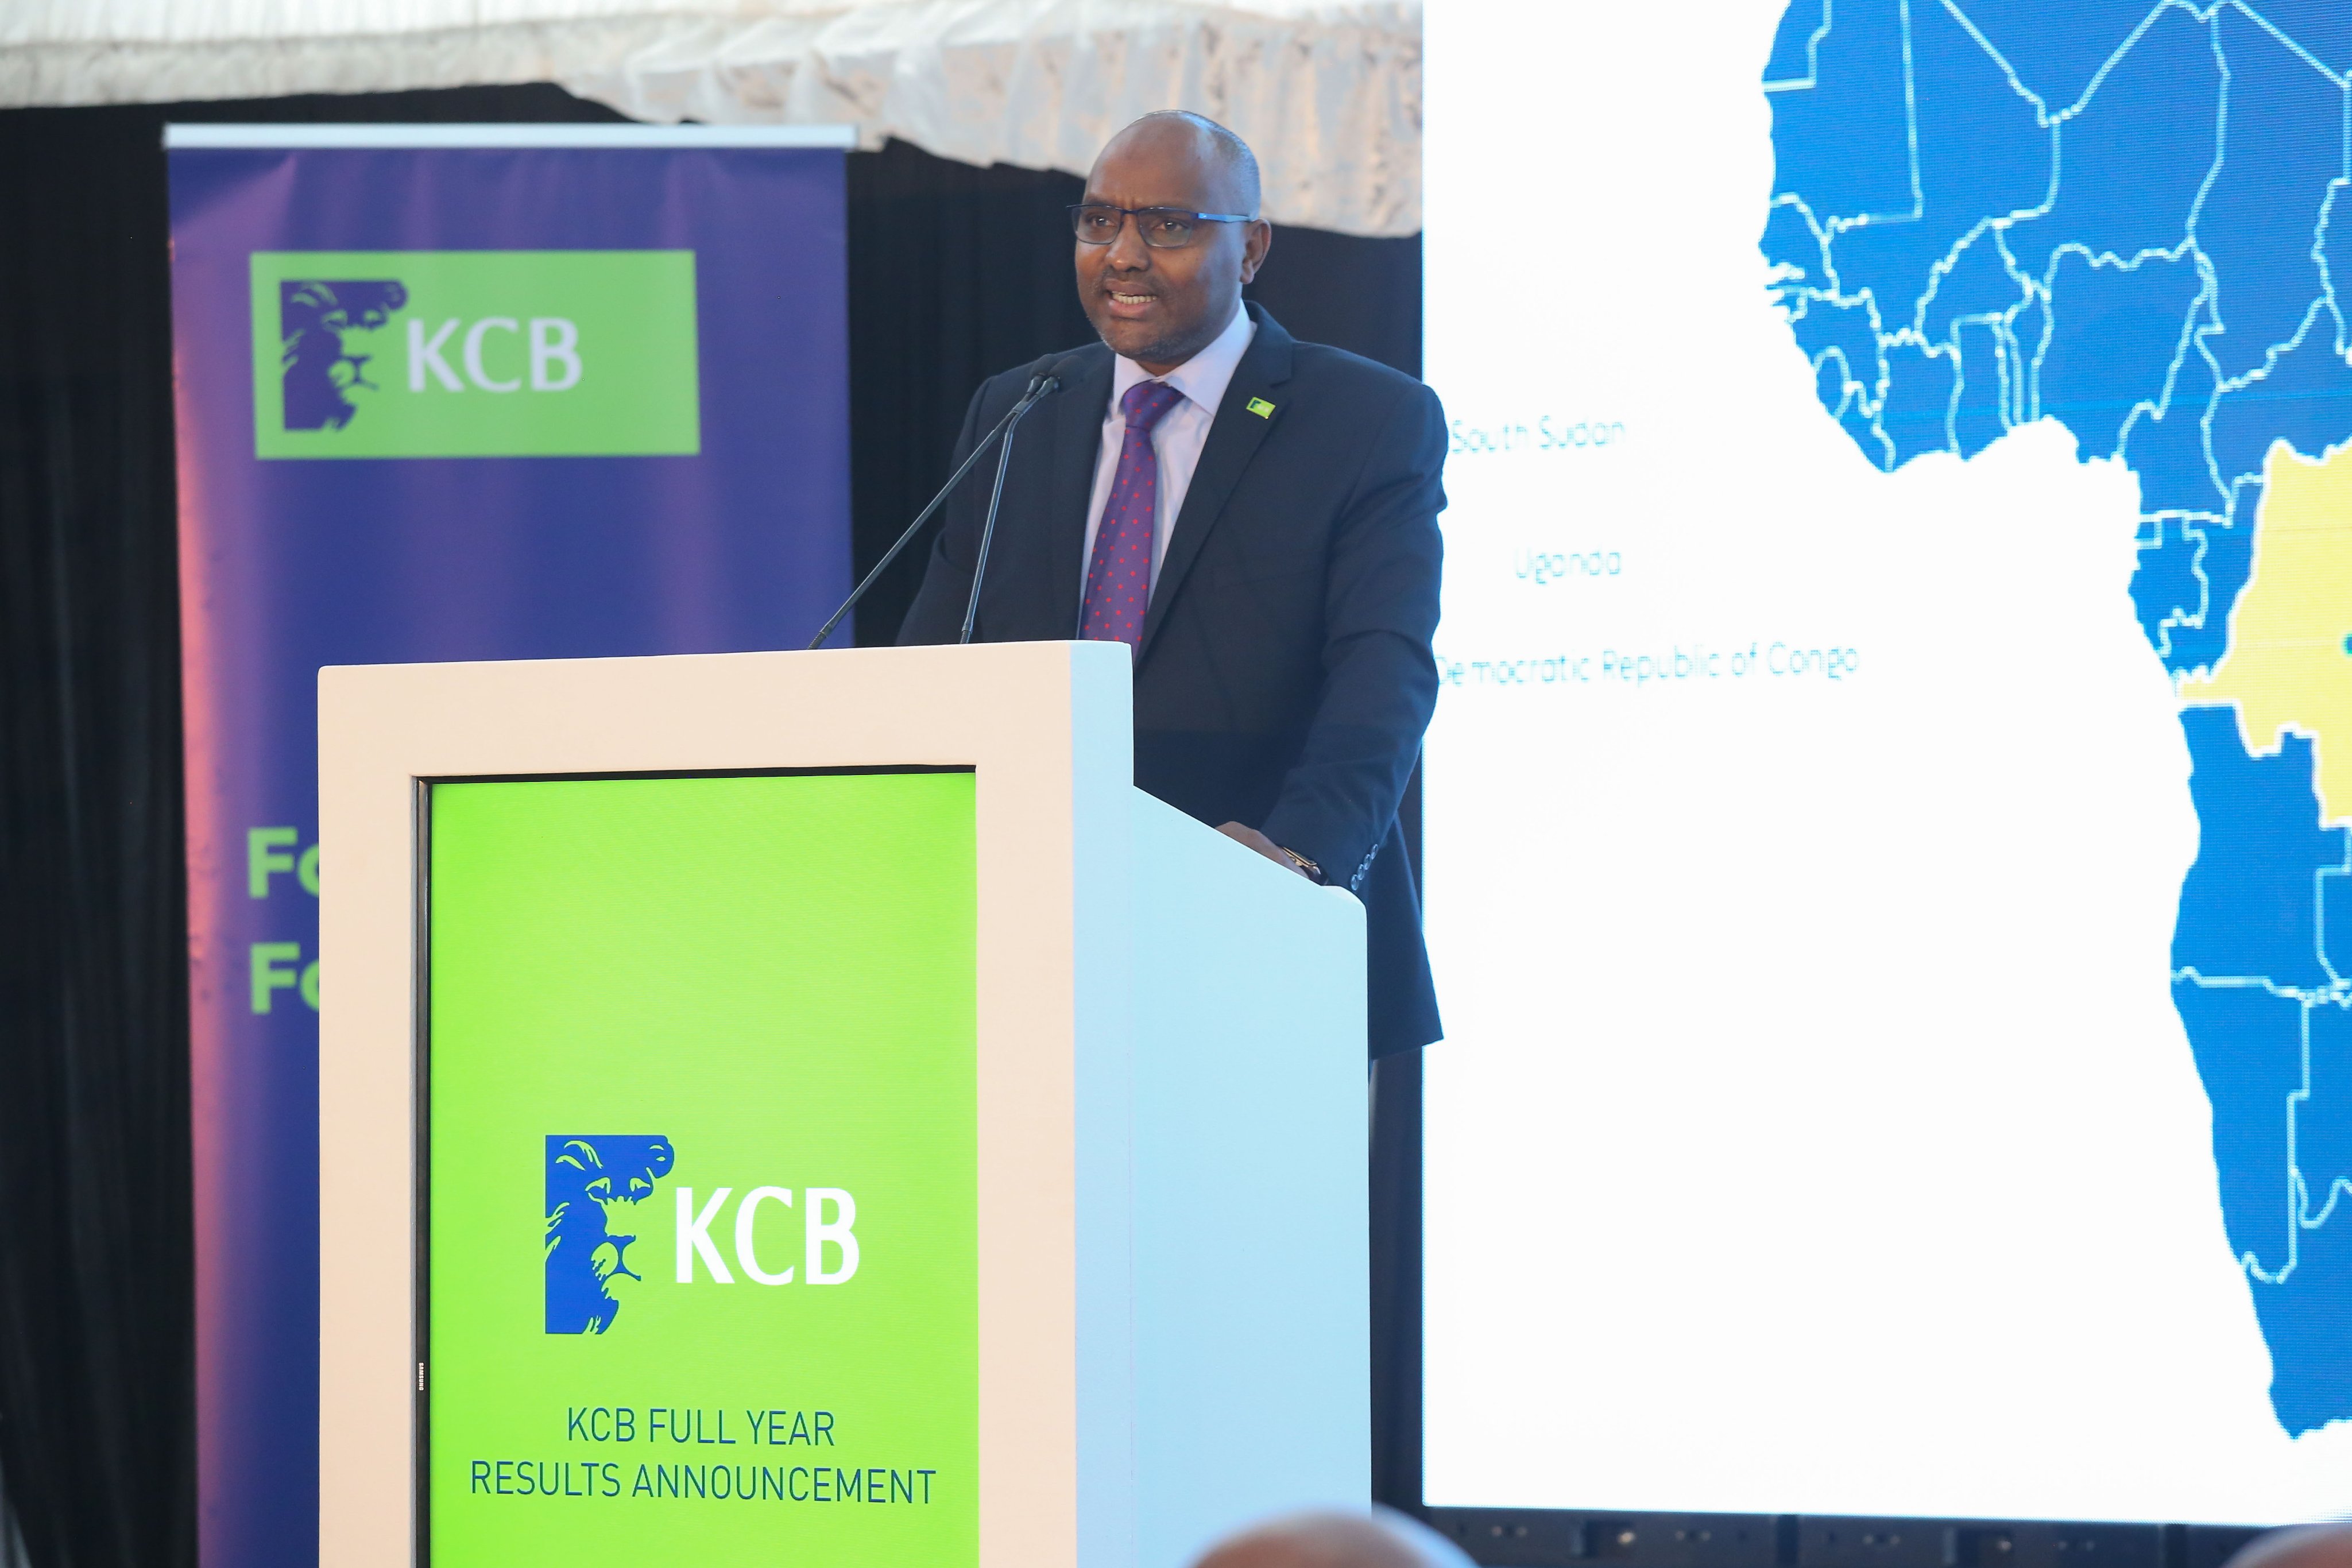 KCB signs African Cross-Border Payment deal to support customers